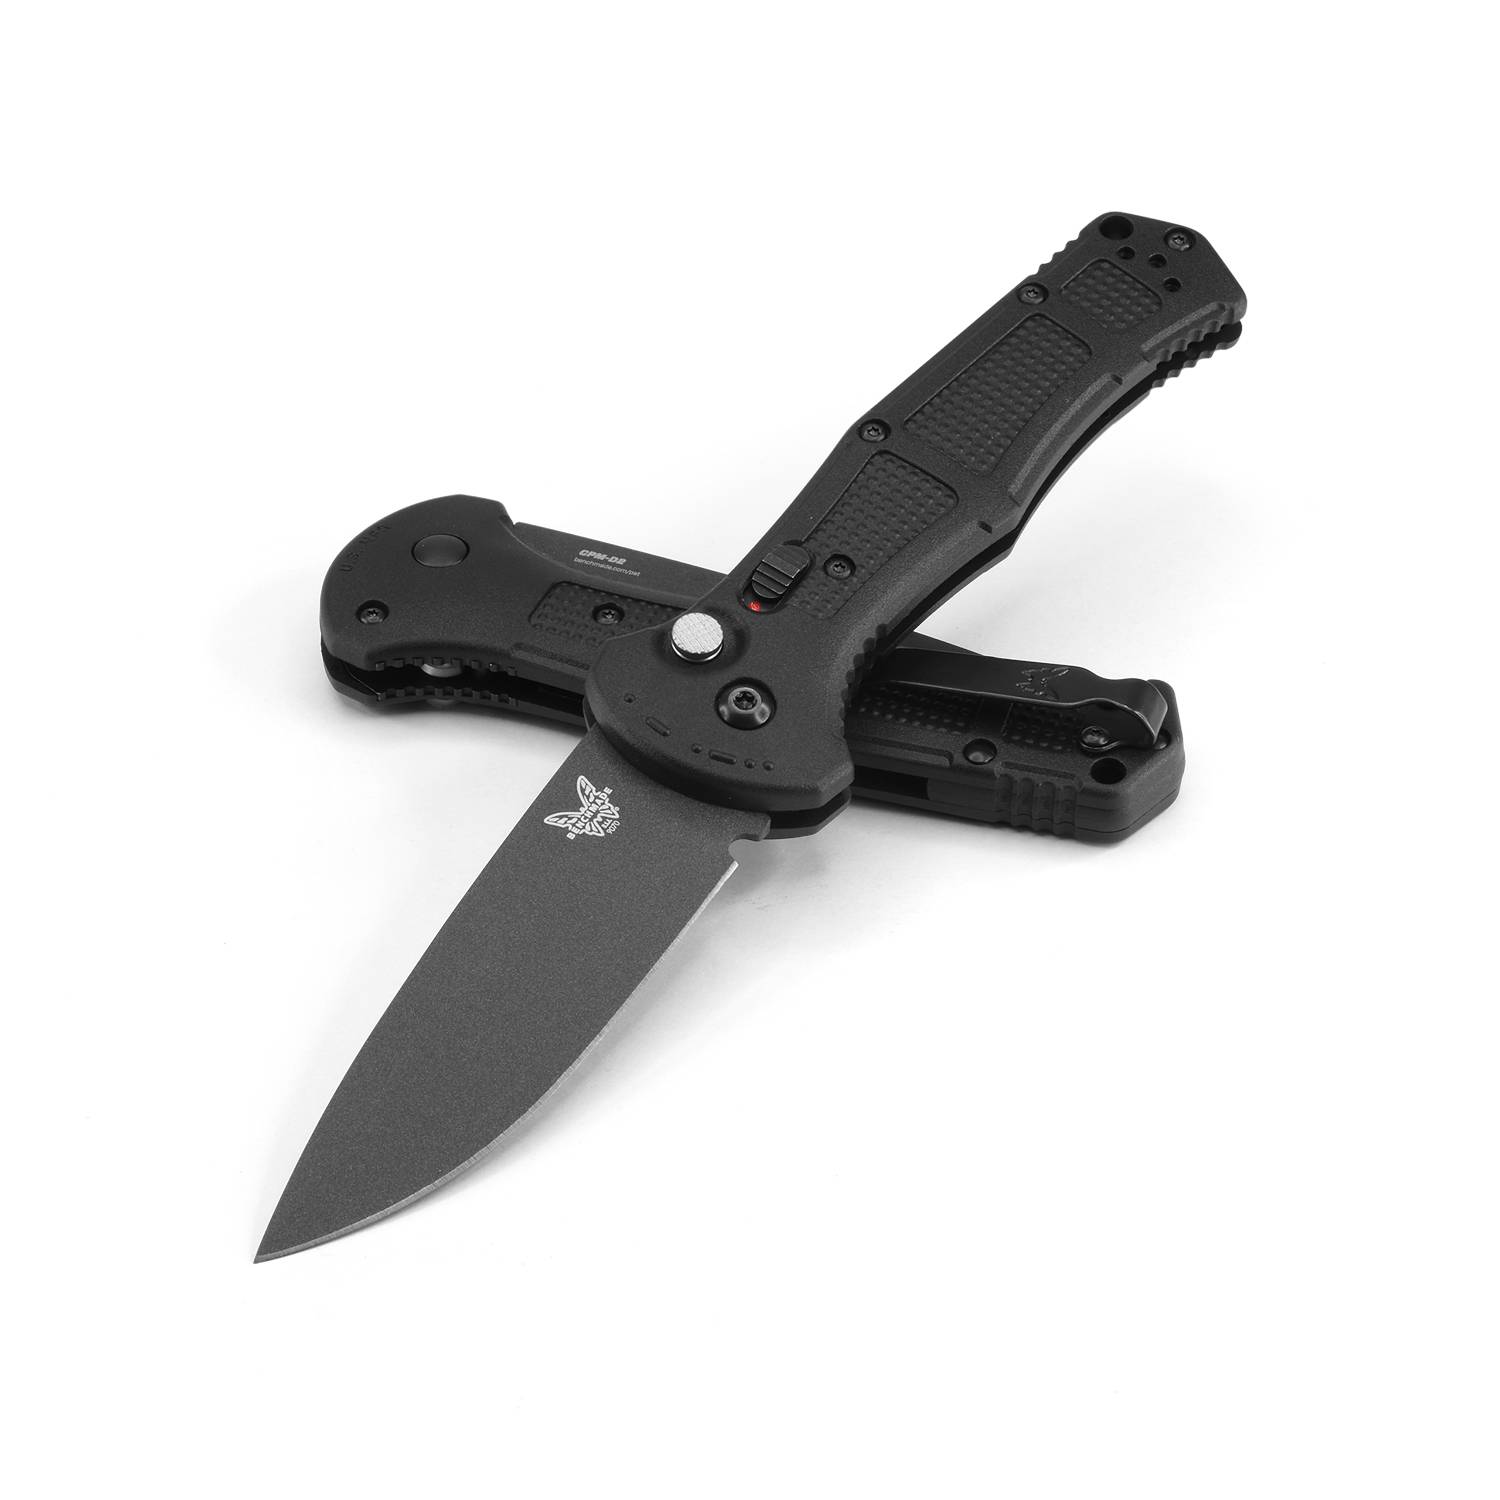 Benchmade 9070BK Claymore Knife